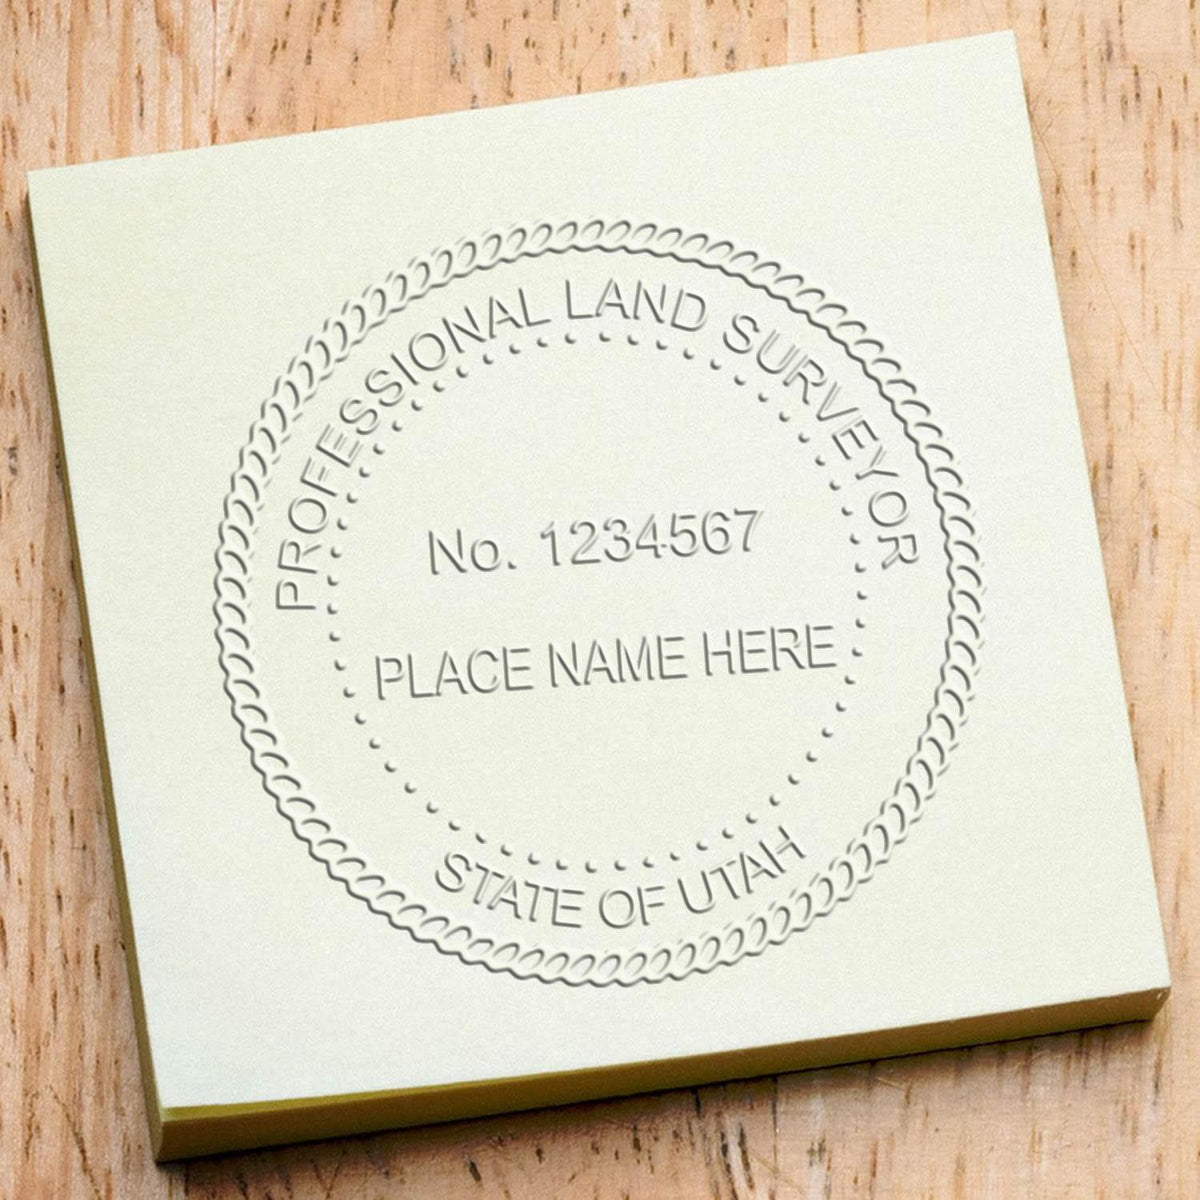 The Gift Utah Land Surveyor Seal stamp impression comes to life with a crisp, detailed image stamped on paper - showcasing true professional quality.